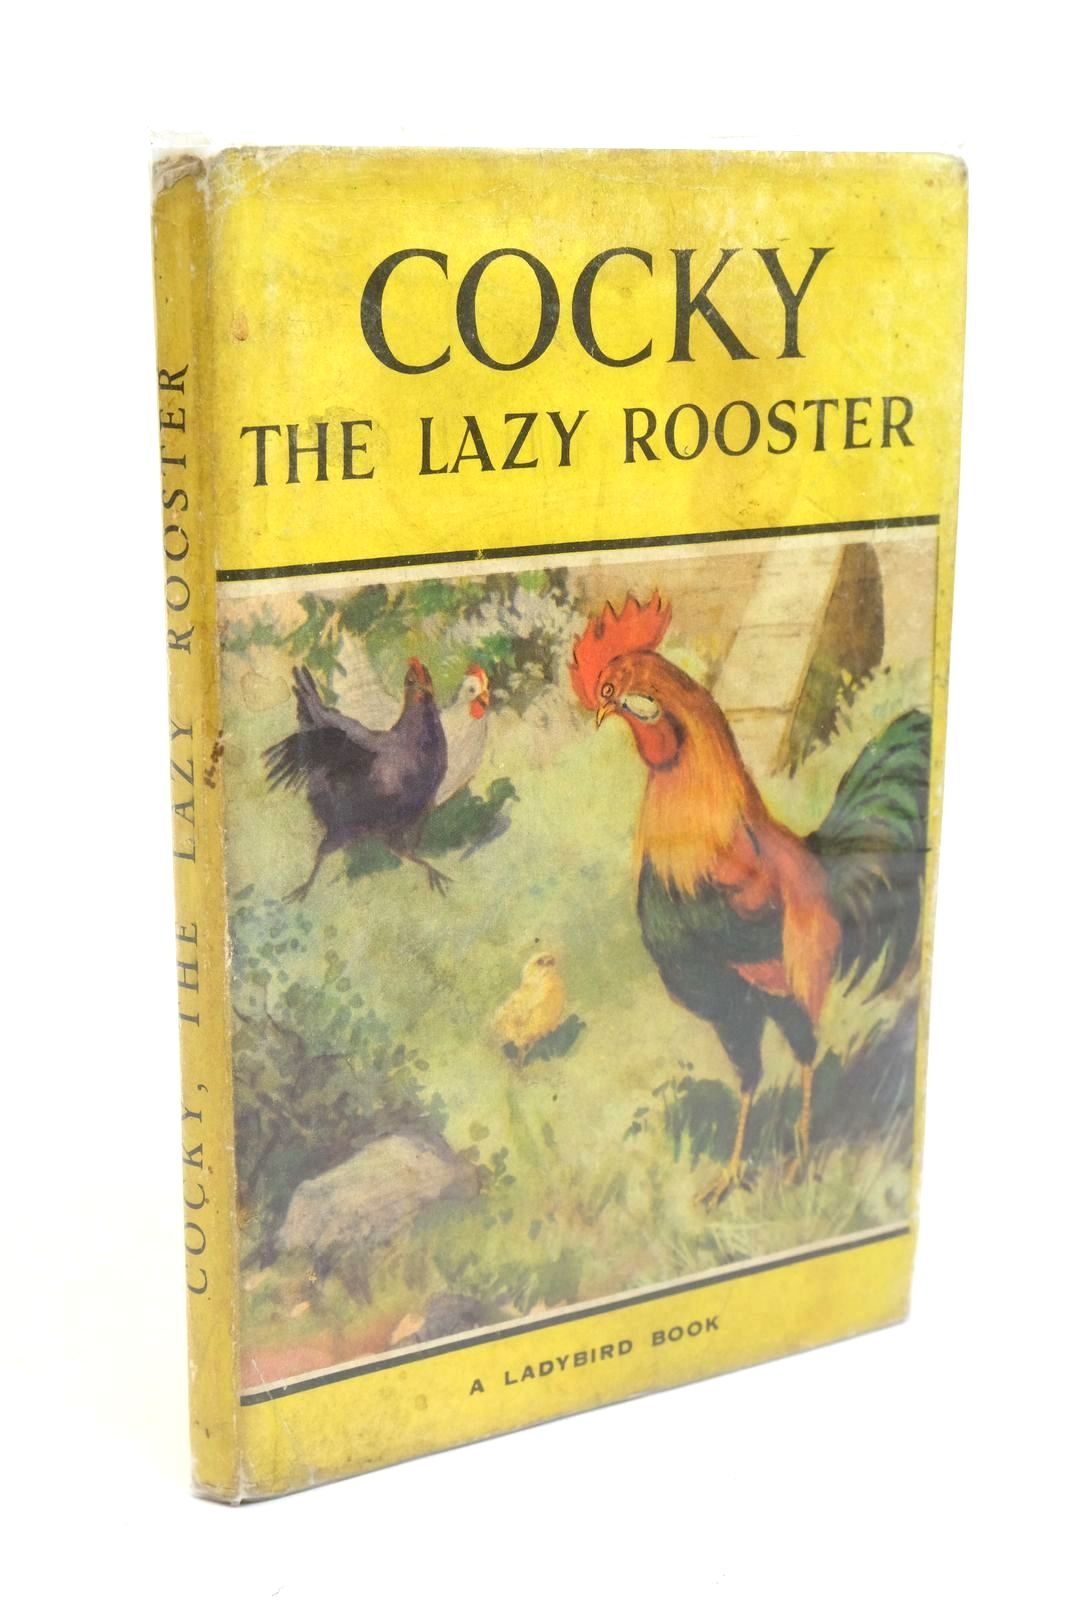 Photo of COCKY THE LAZY ROOSTER written by Barr, Noel illustrated by Hickling, P.B. published by Wills &amp; Hepworth Ltd. (STOCK CODE: 1322395)  for sale by Stella & Rose's Books